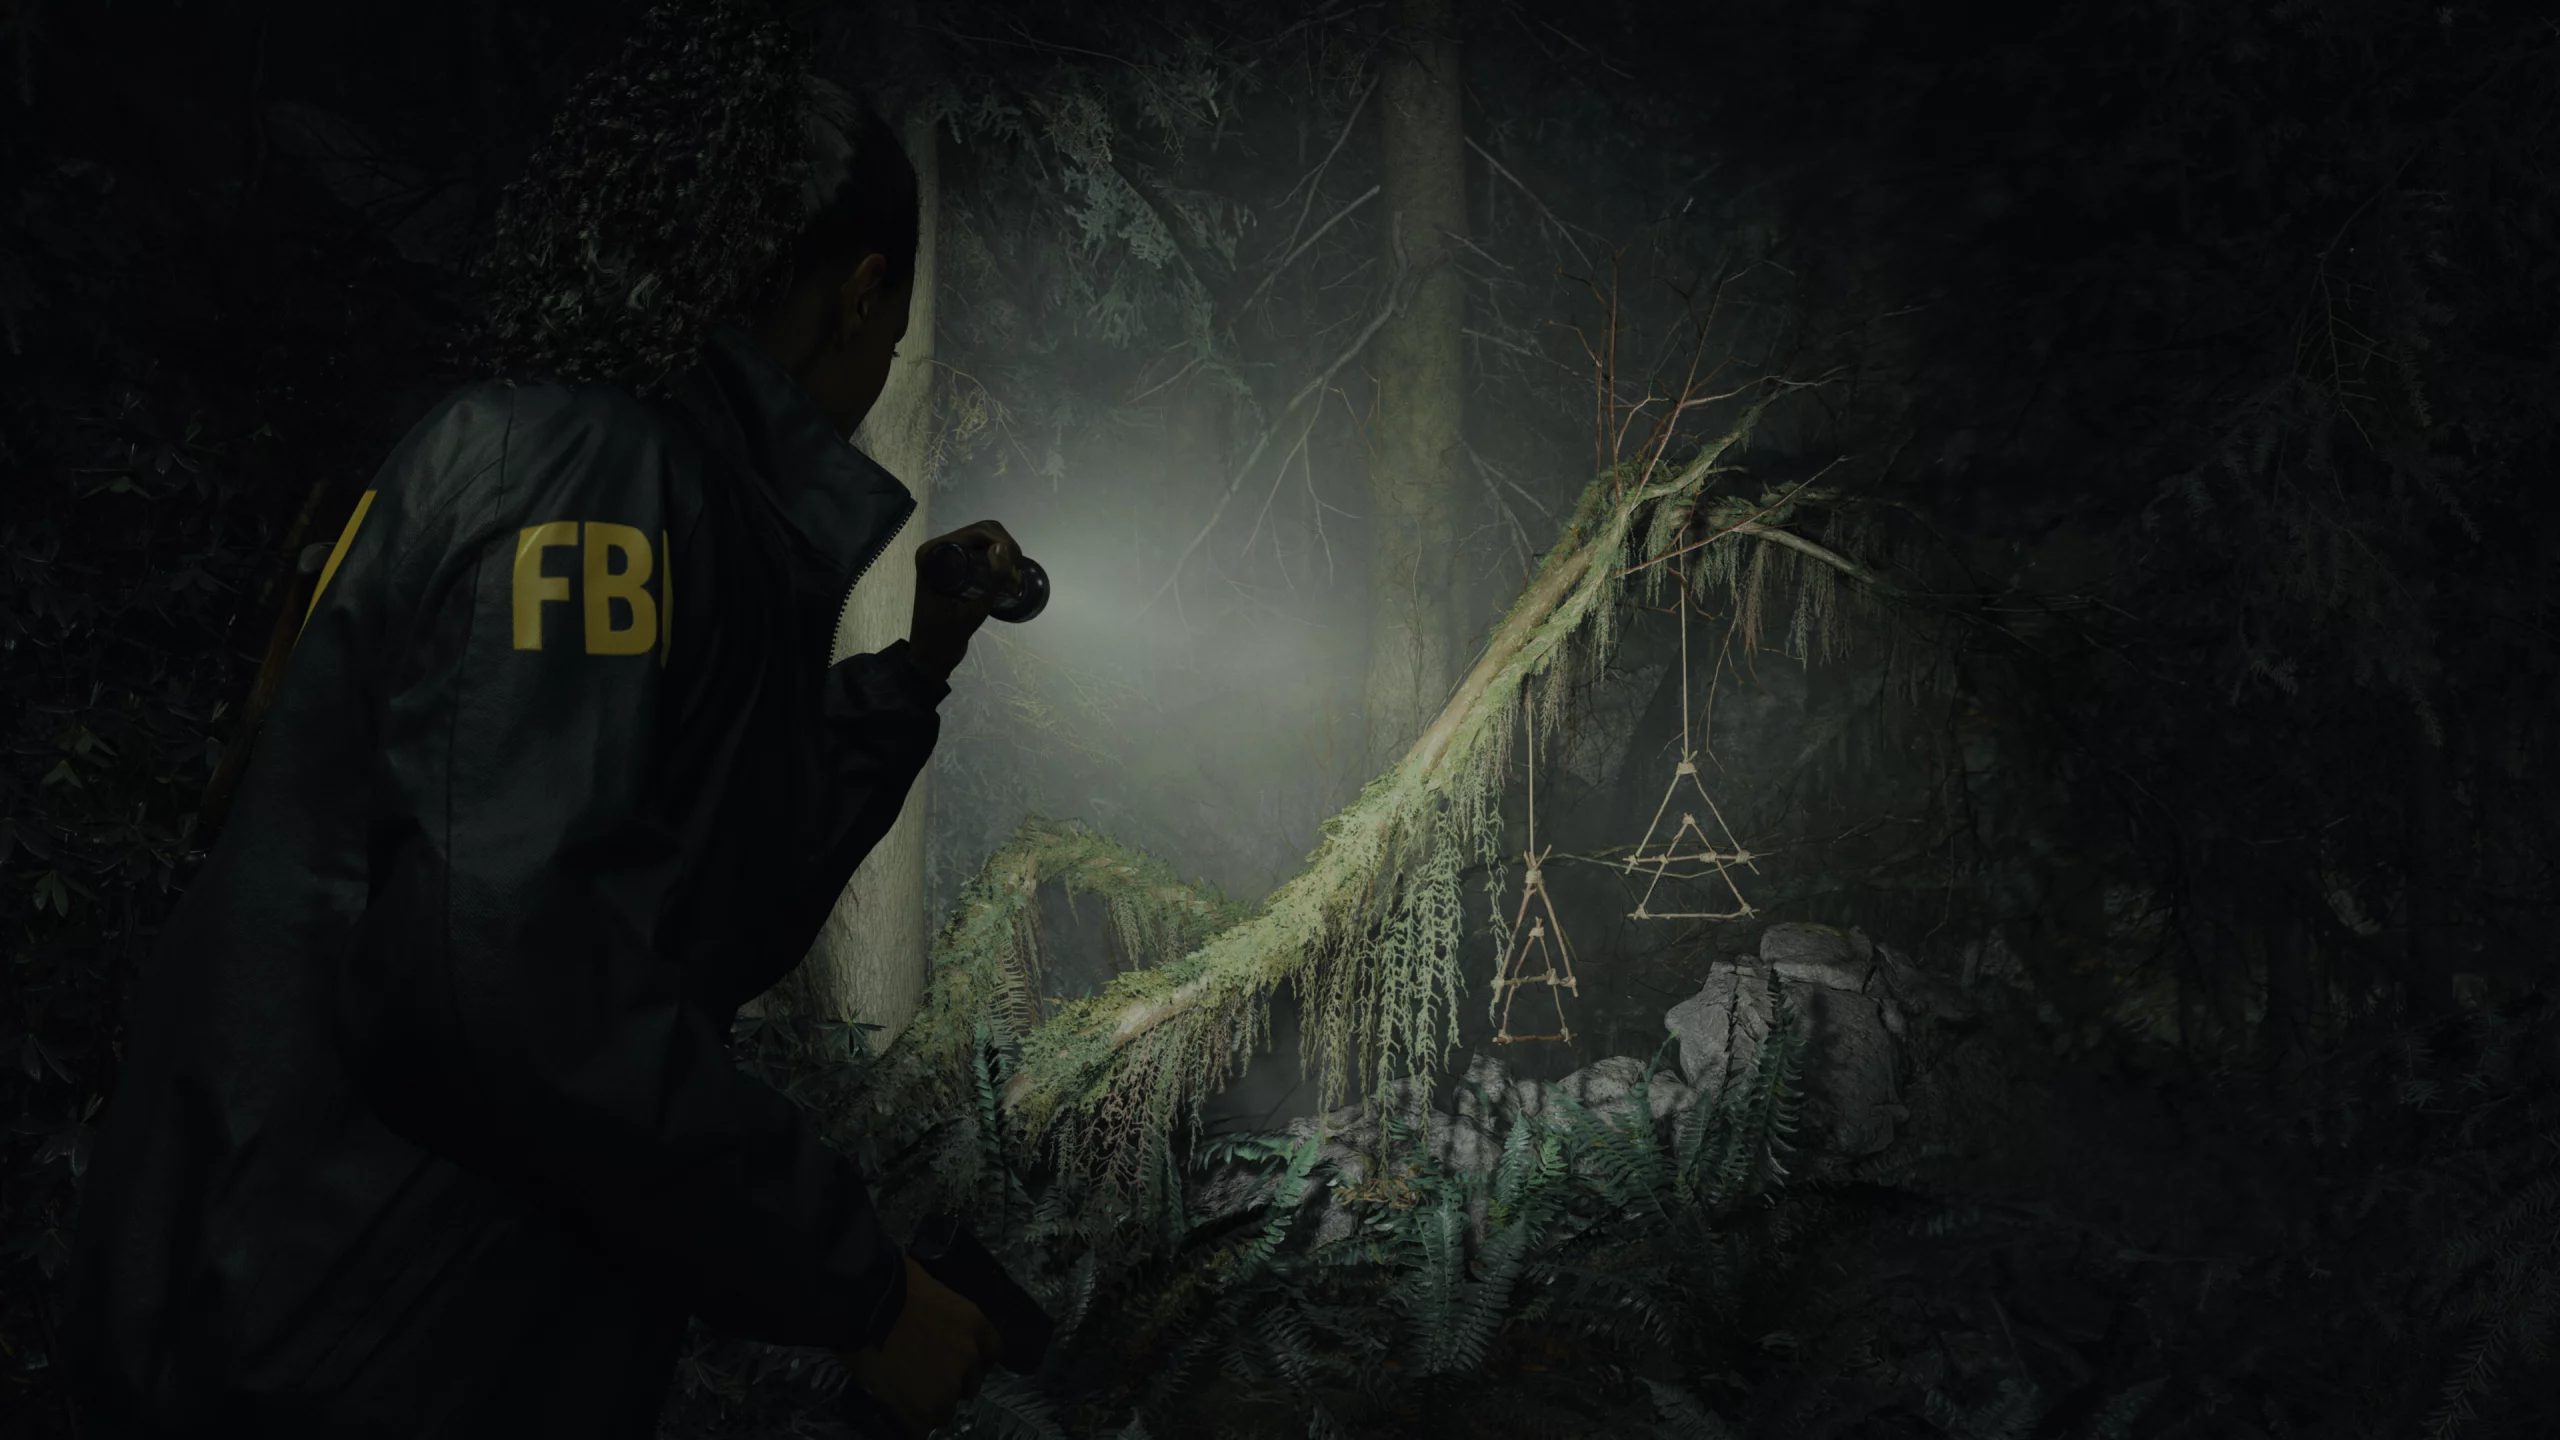 Alan Wake 2 HD wallpaper featuring a mysterious figure exploring a dark, eerie forest with supernatural elements.